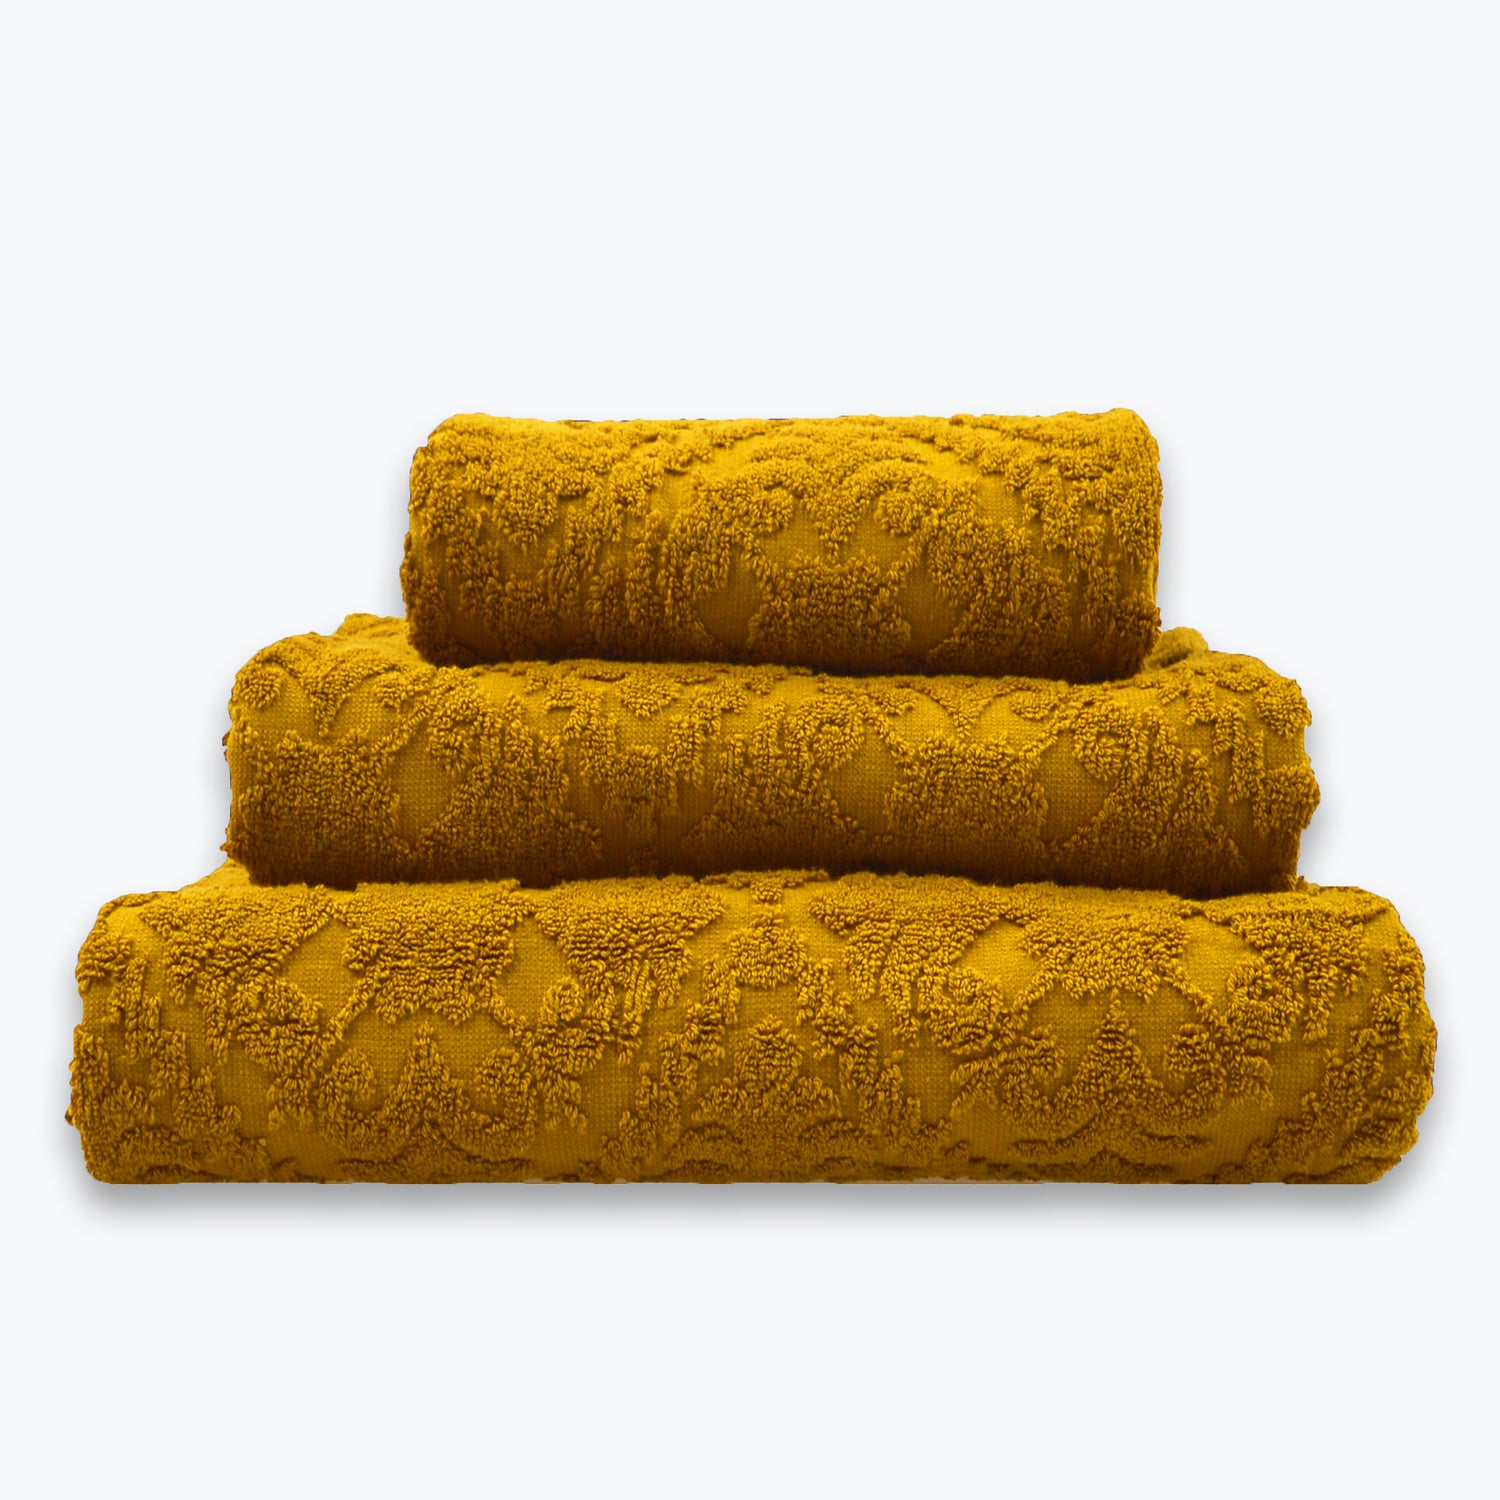 Mustard Country House Towel Set - Floral Textured Bathroom Towels